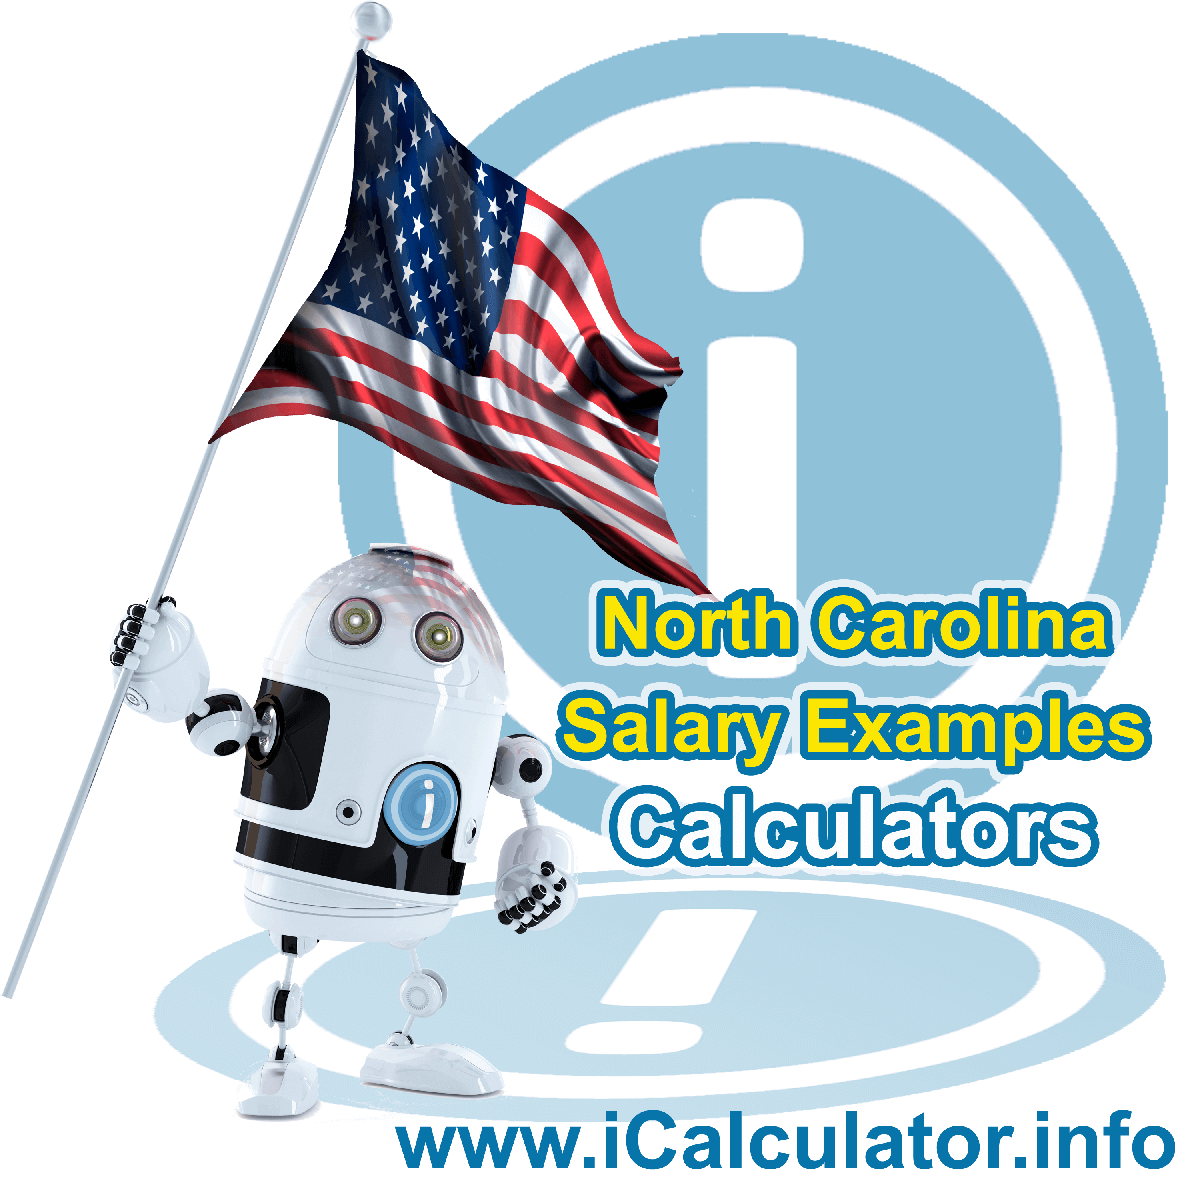 North Carolina Salary Example for $ 145,000.00 in 2023 | iCalculator™ | $ 145,000.00 salary example for employee and employer paying North Carolina State tincome taxes. Detailed salary after tax calculation including North Carolina State Tax, Federal State Tax, Medicare Deductions, Social Security, Capital Gains and other income tax and salary deductions complete with supporting North Carolina state tax tables 